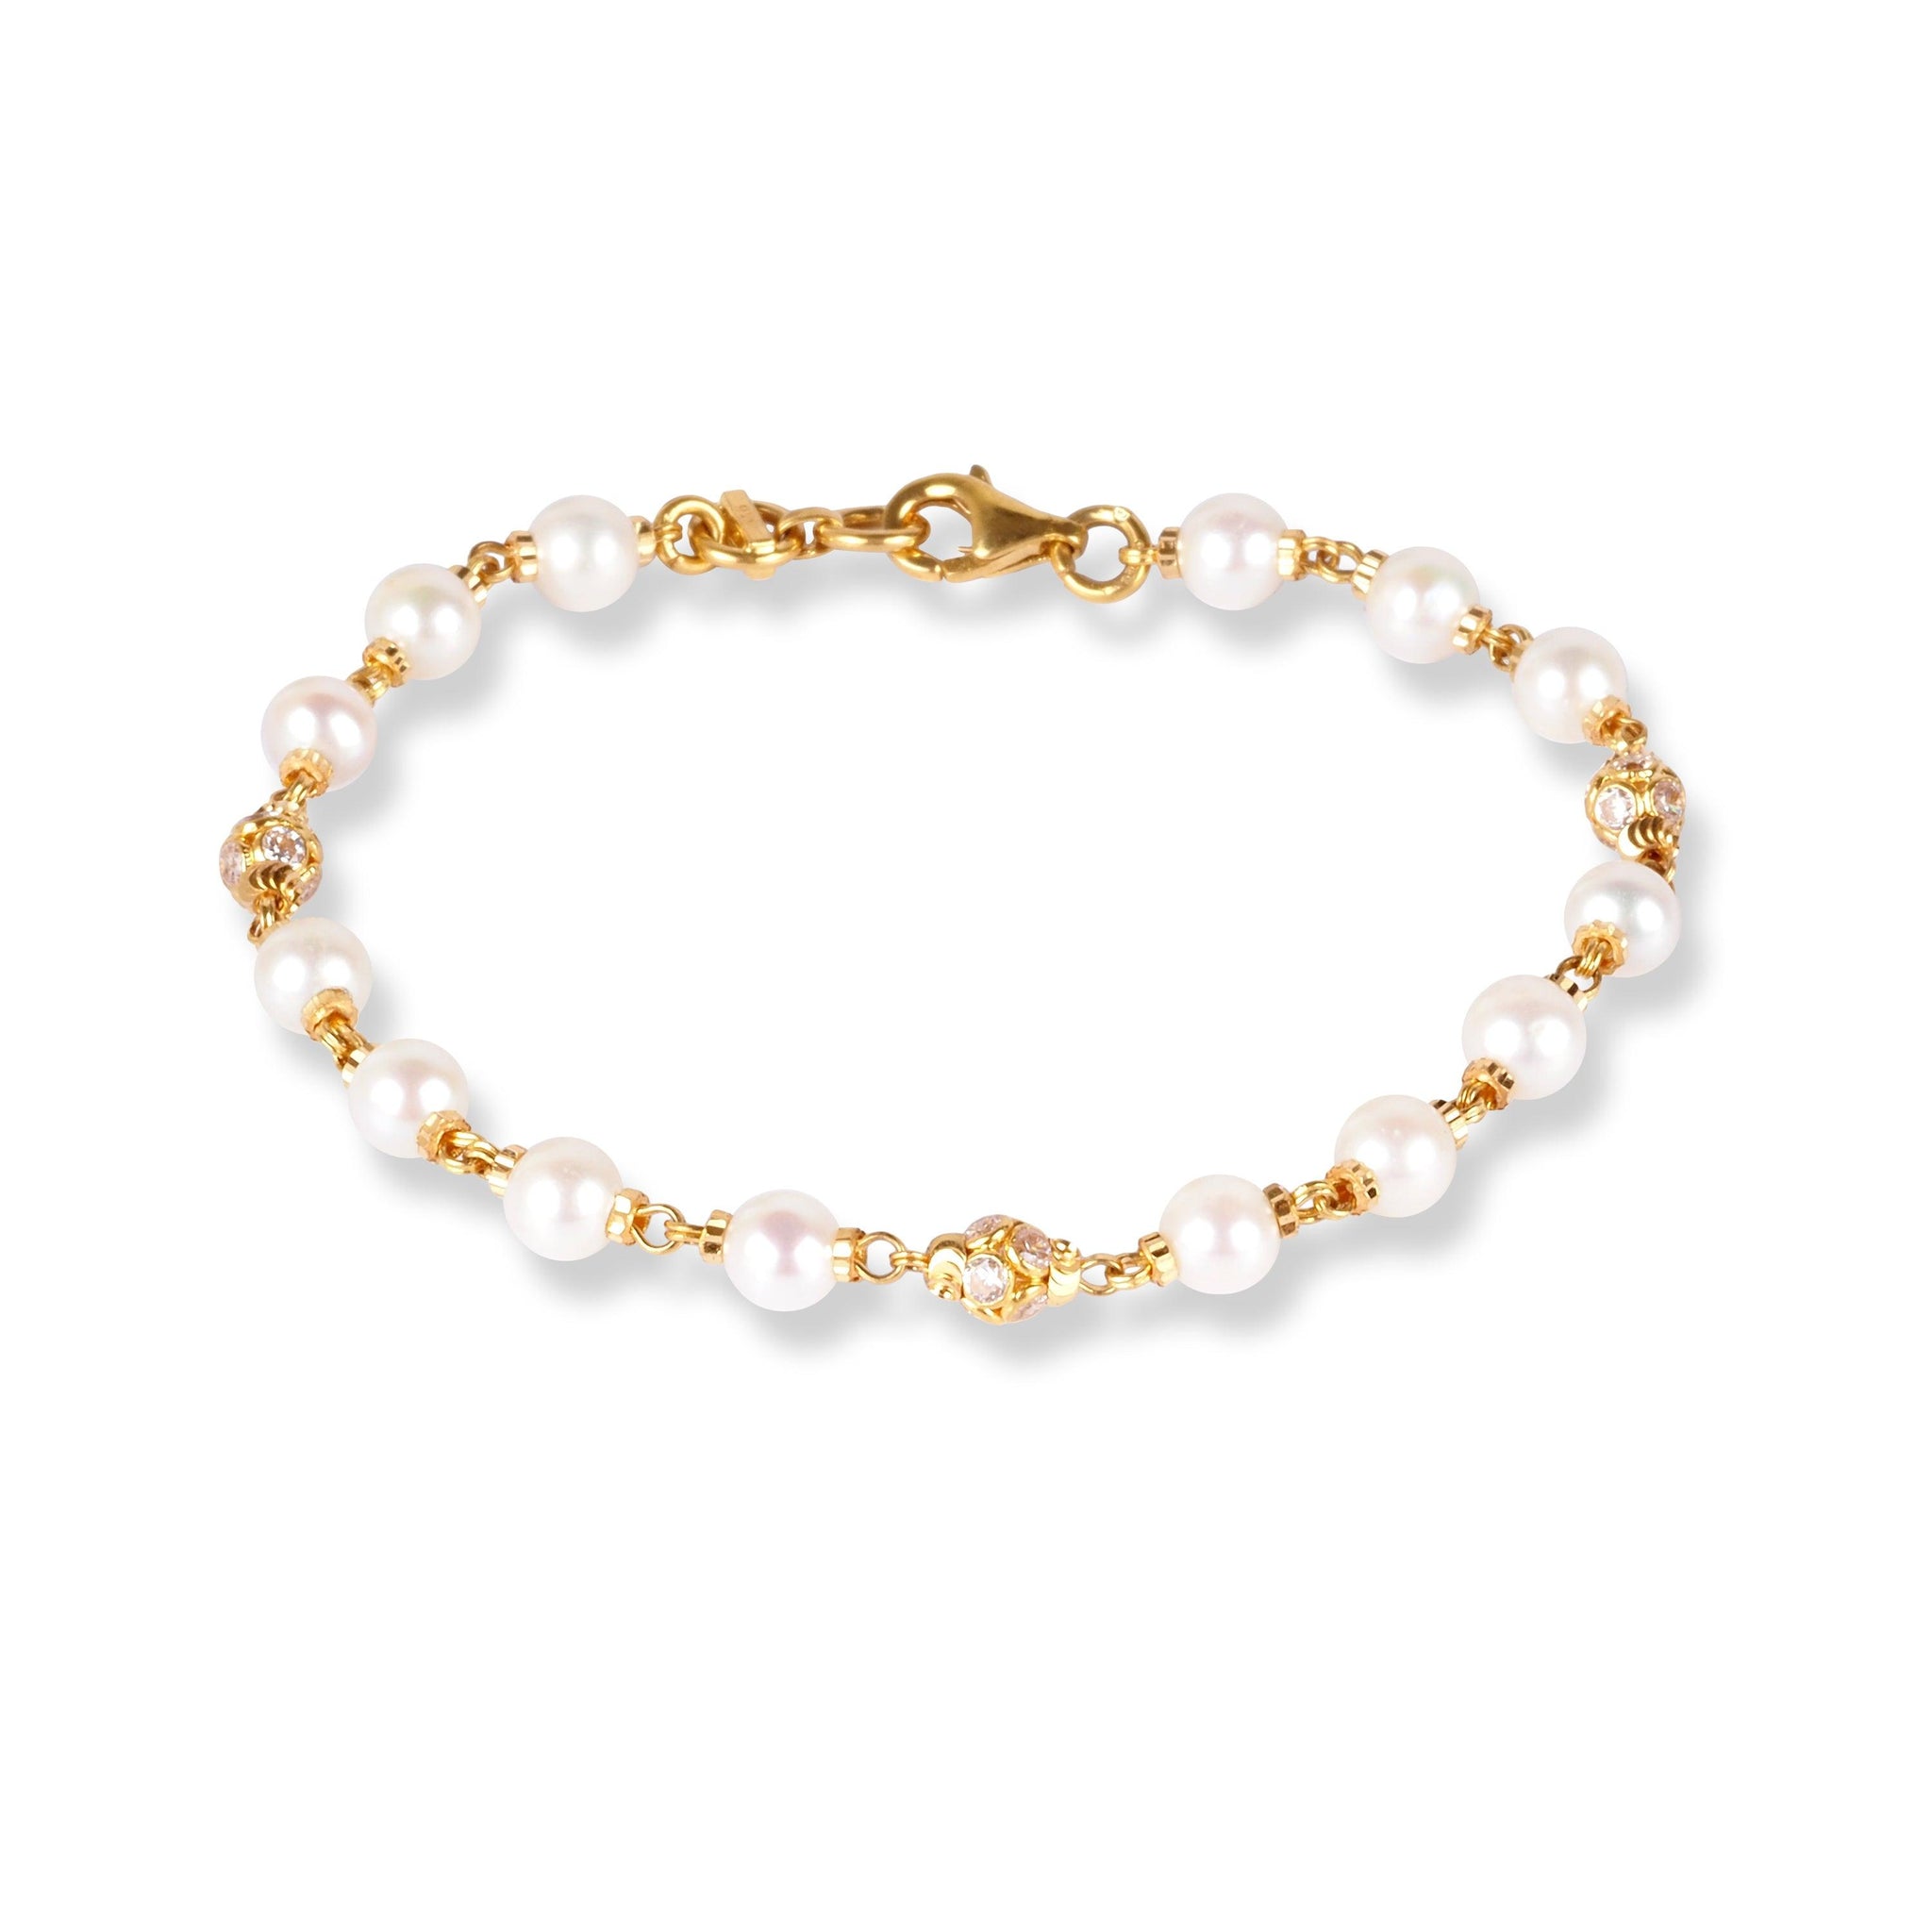 22ct Gold Bracelet with Pearl and Cubic Zirconia Stones LBR-7130